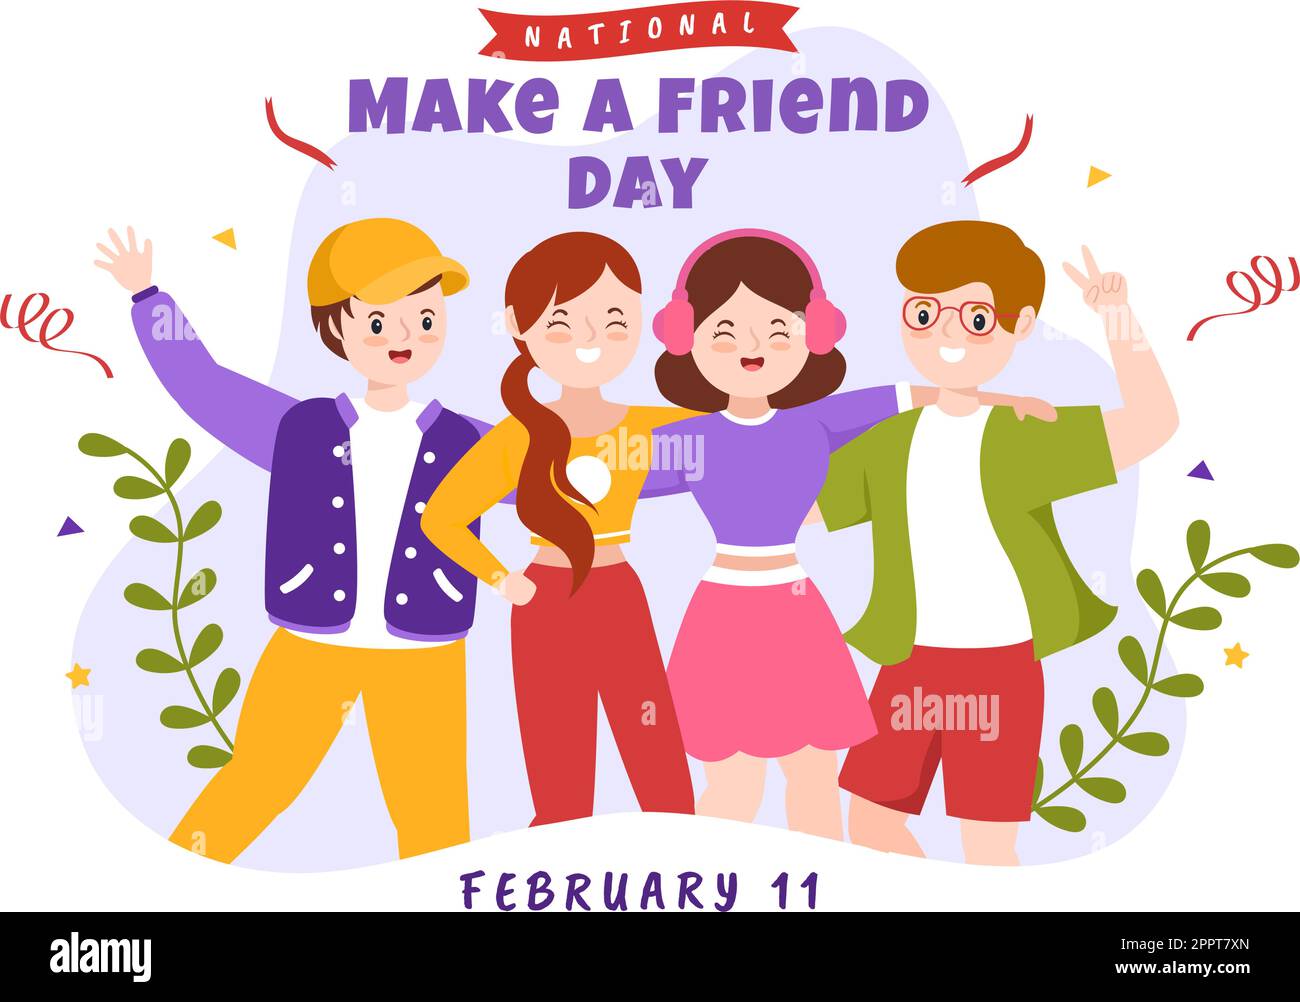 National Make a Friend Day Observed on February 11th to Meet Someone and a New Friendship in Flat Cartoon Hand Drawn Templates Illustration Stock Vector